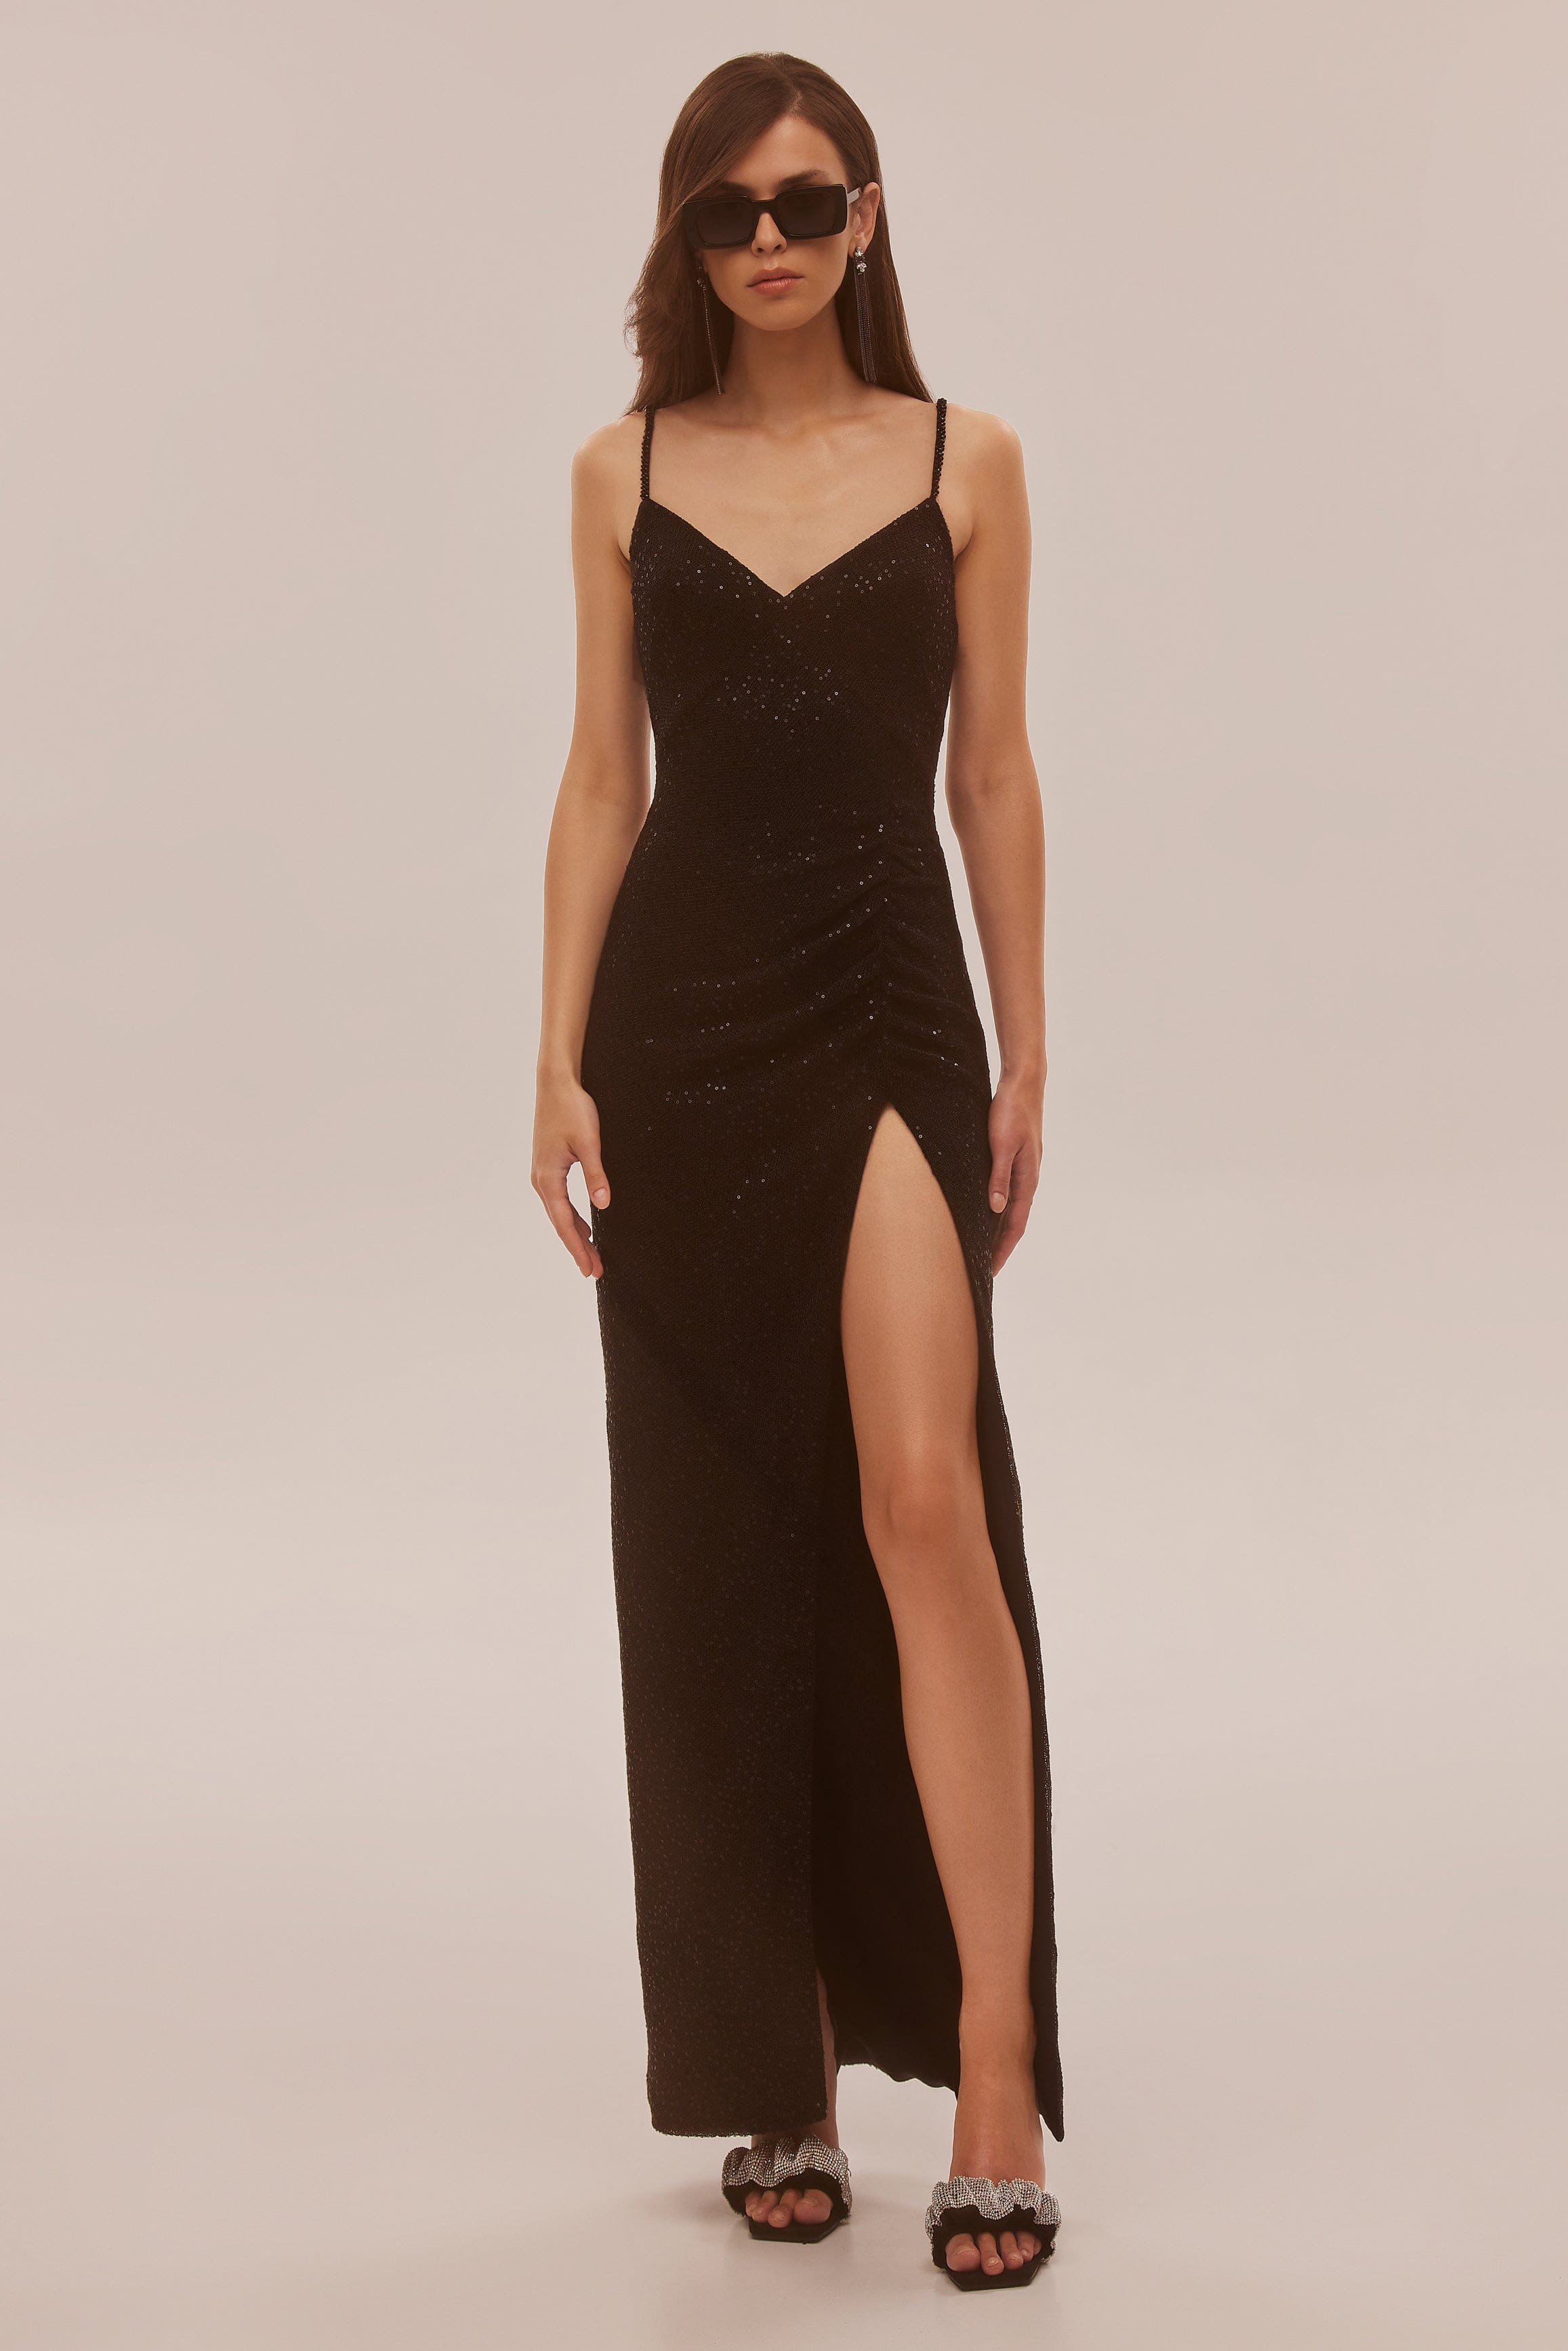 Buy Women's Solid Night Dress with Lace Detail and Spaghetti Straps Online